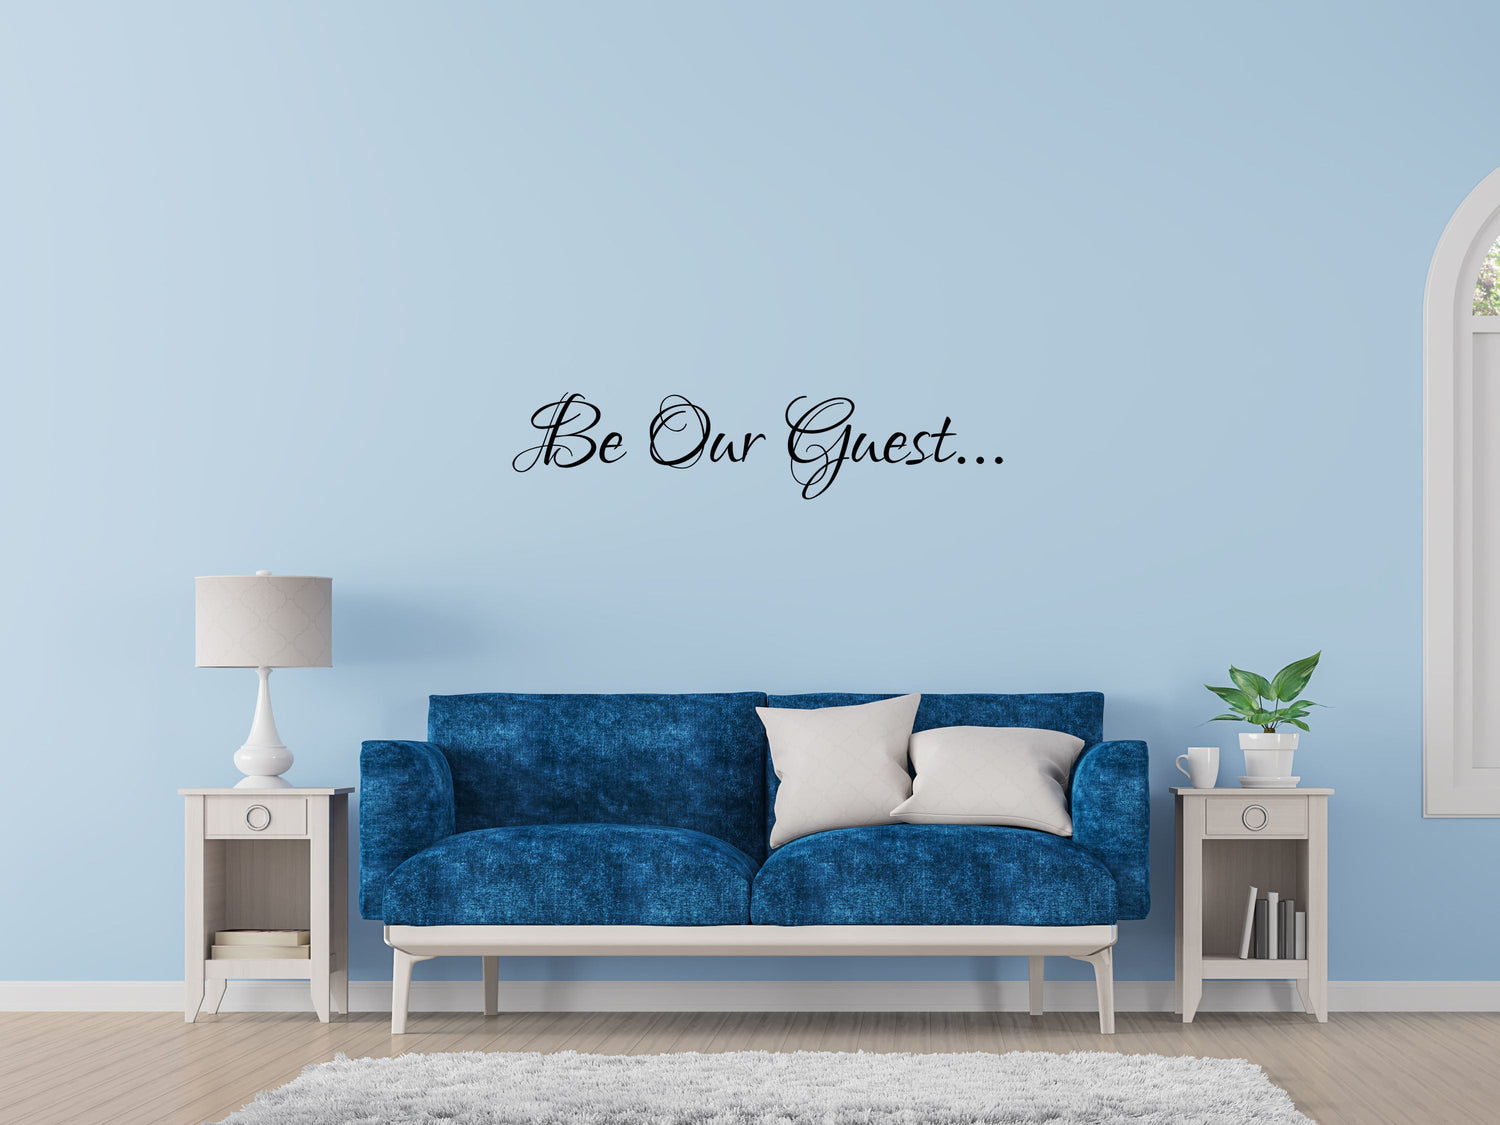 Be Our Guest Bedroom Sign Wall Quote - Guest Room Wall Decal Vinyl Wall Decal Inspirational Wall Signs 